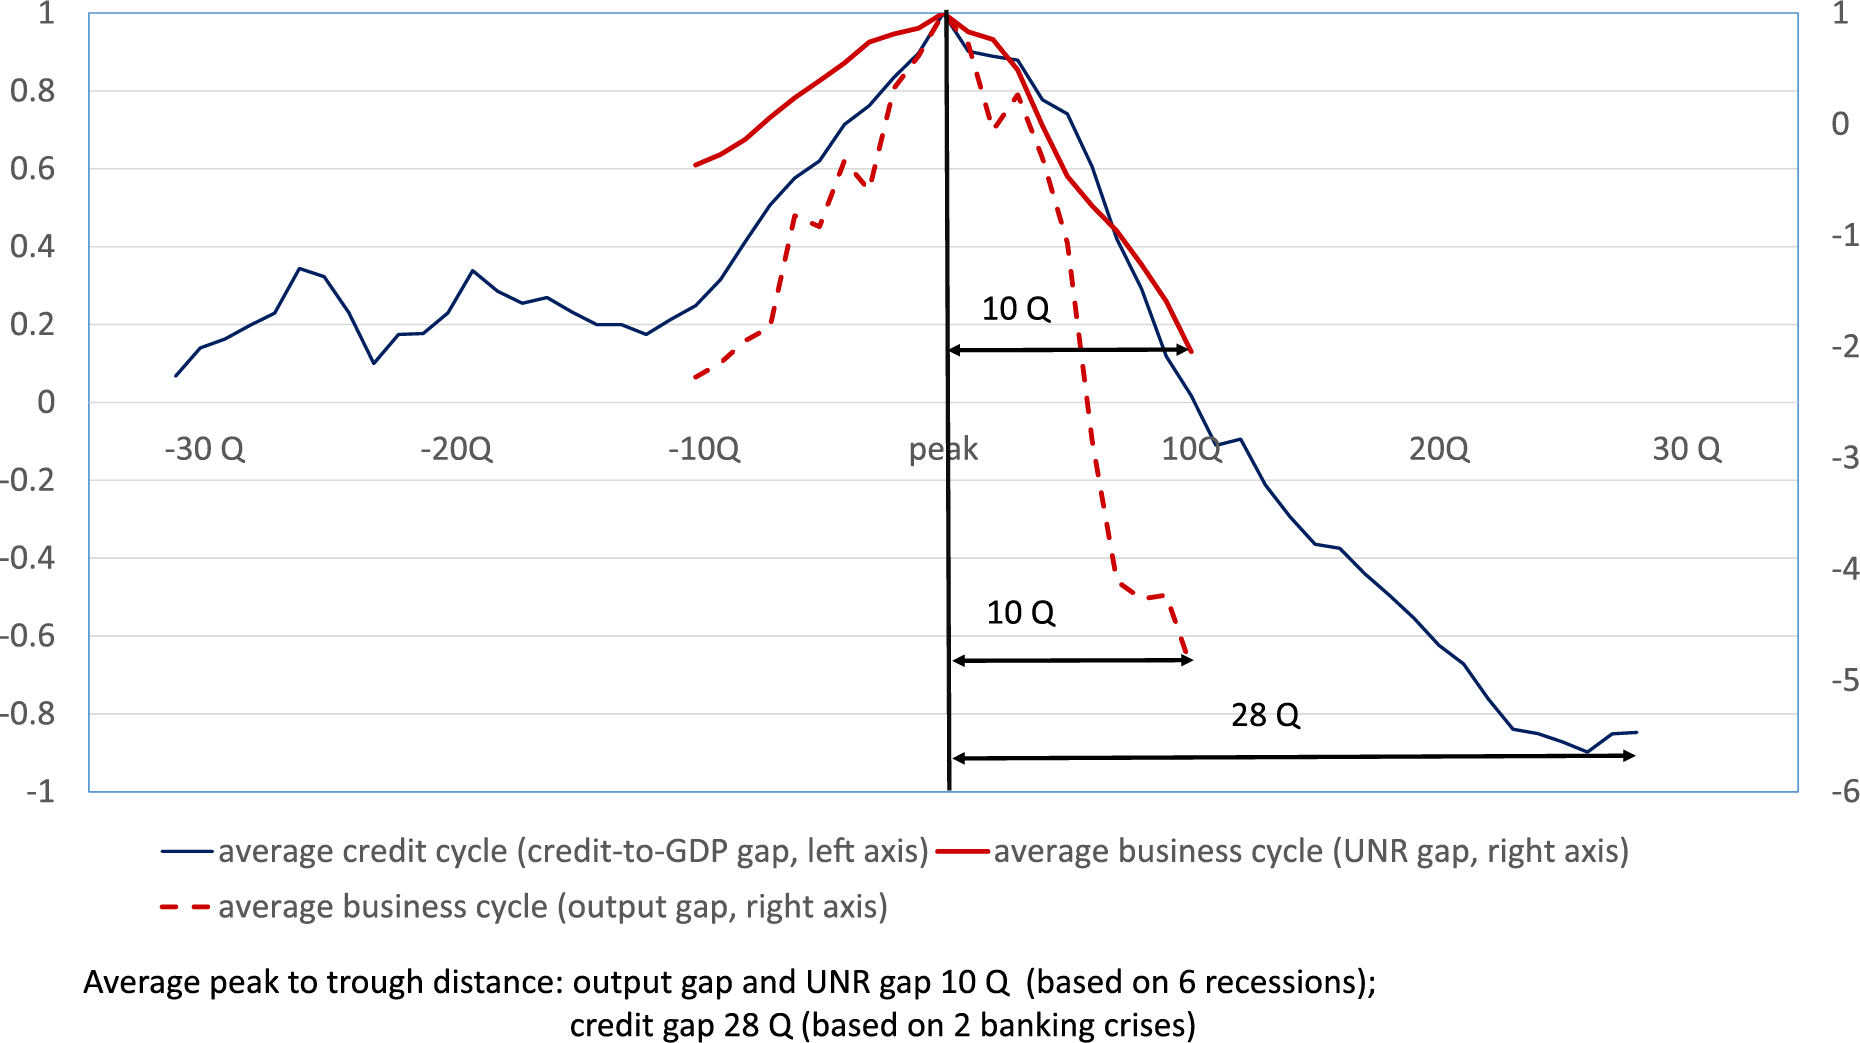 Figure 2. Average Duration of Business Cycles and Credit Cycles in the United States. See accessible link for data description.